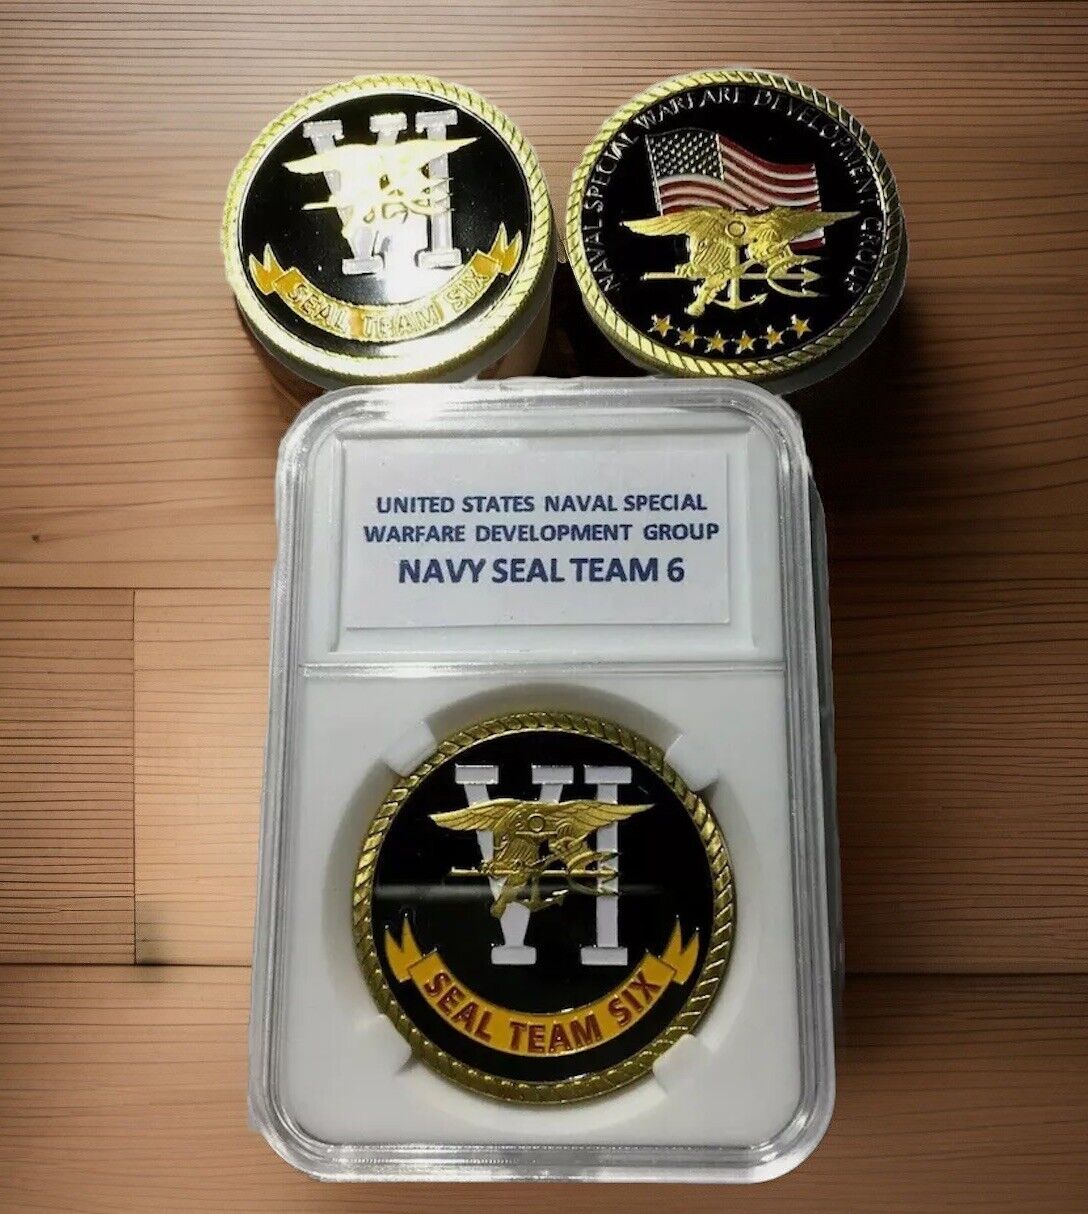 Seal Team 6 CHALLENGE COIN US NAVY NAVAL SPECIAL WARFARE DEVELOPMENT GROUP RARE